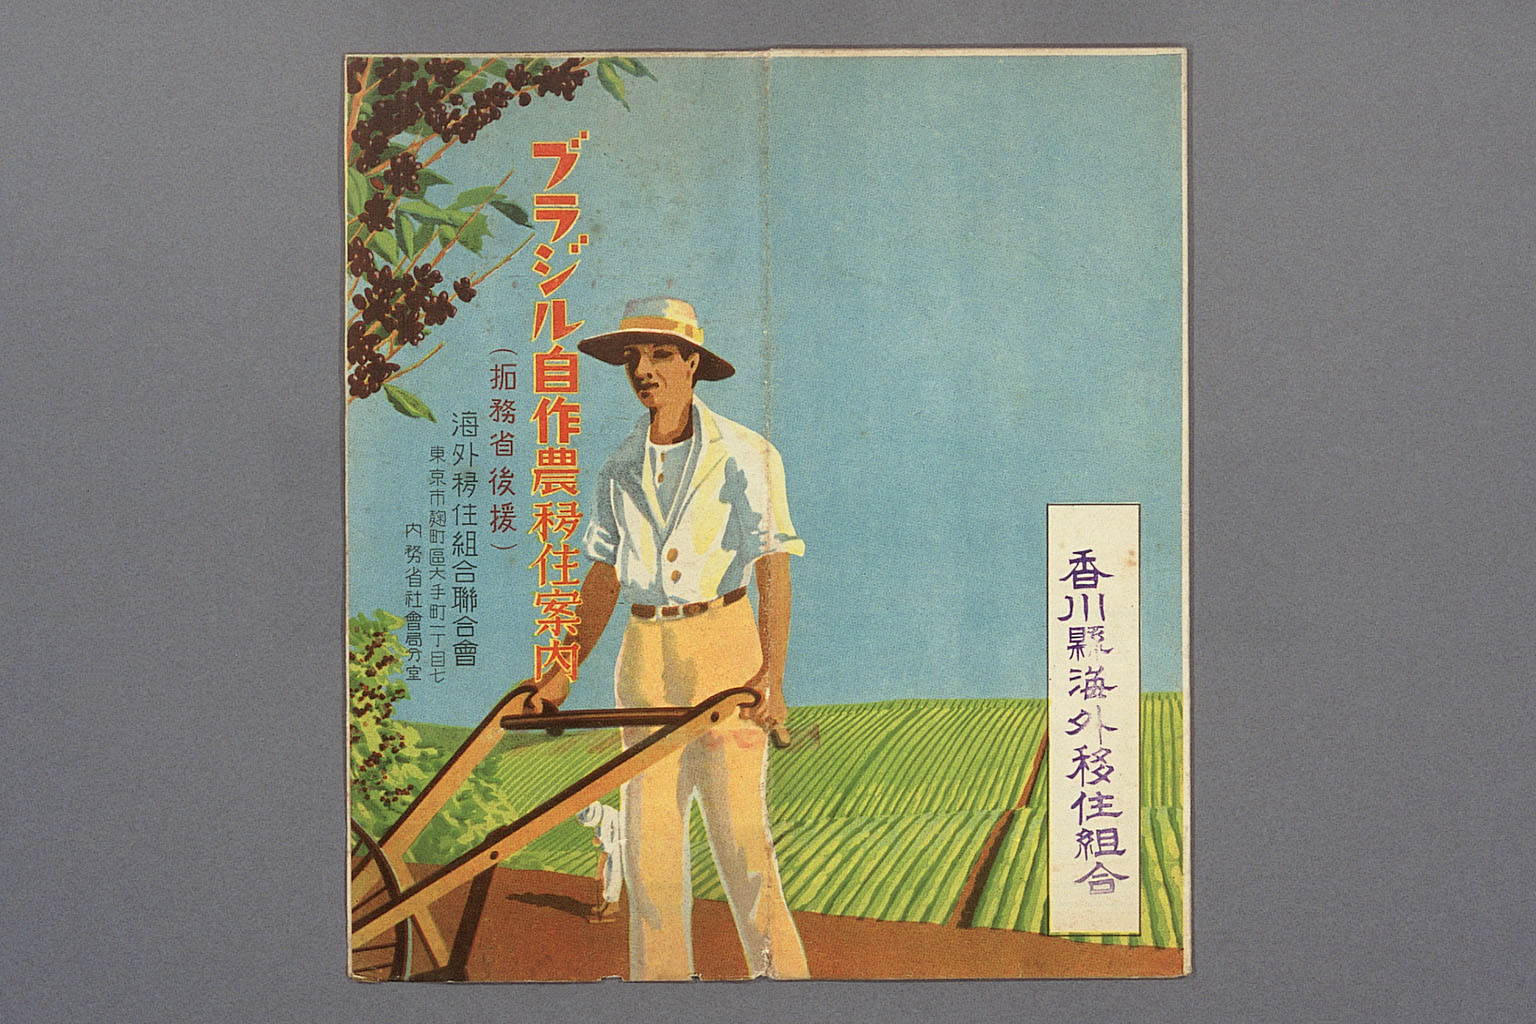 Image “Federation of Overseas Emigrant Cooperatives pamphlet”